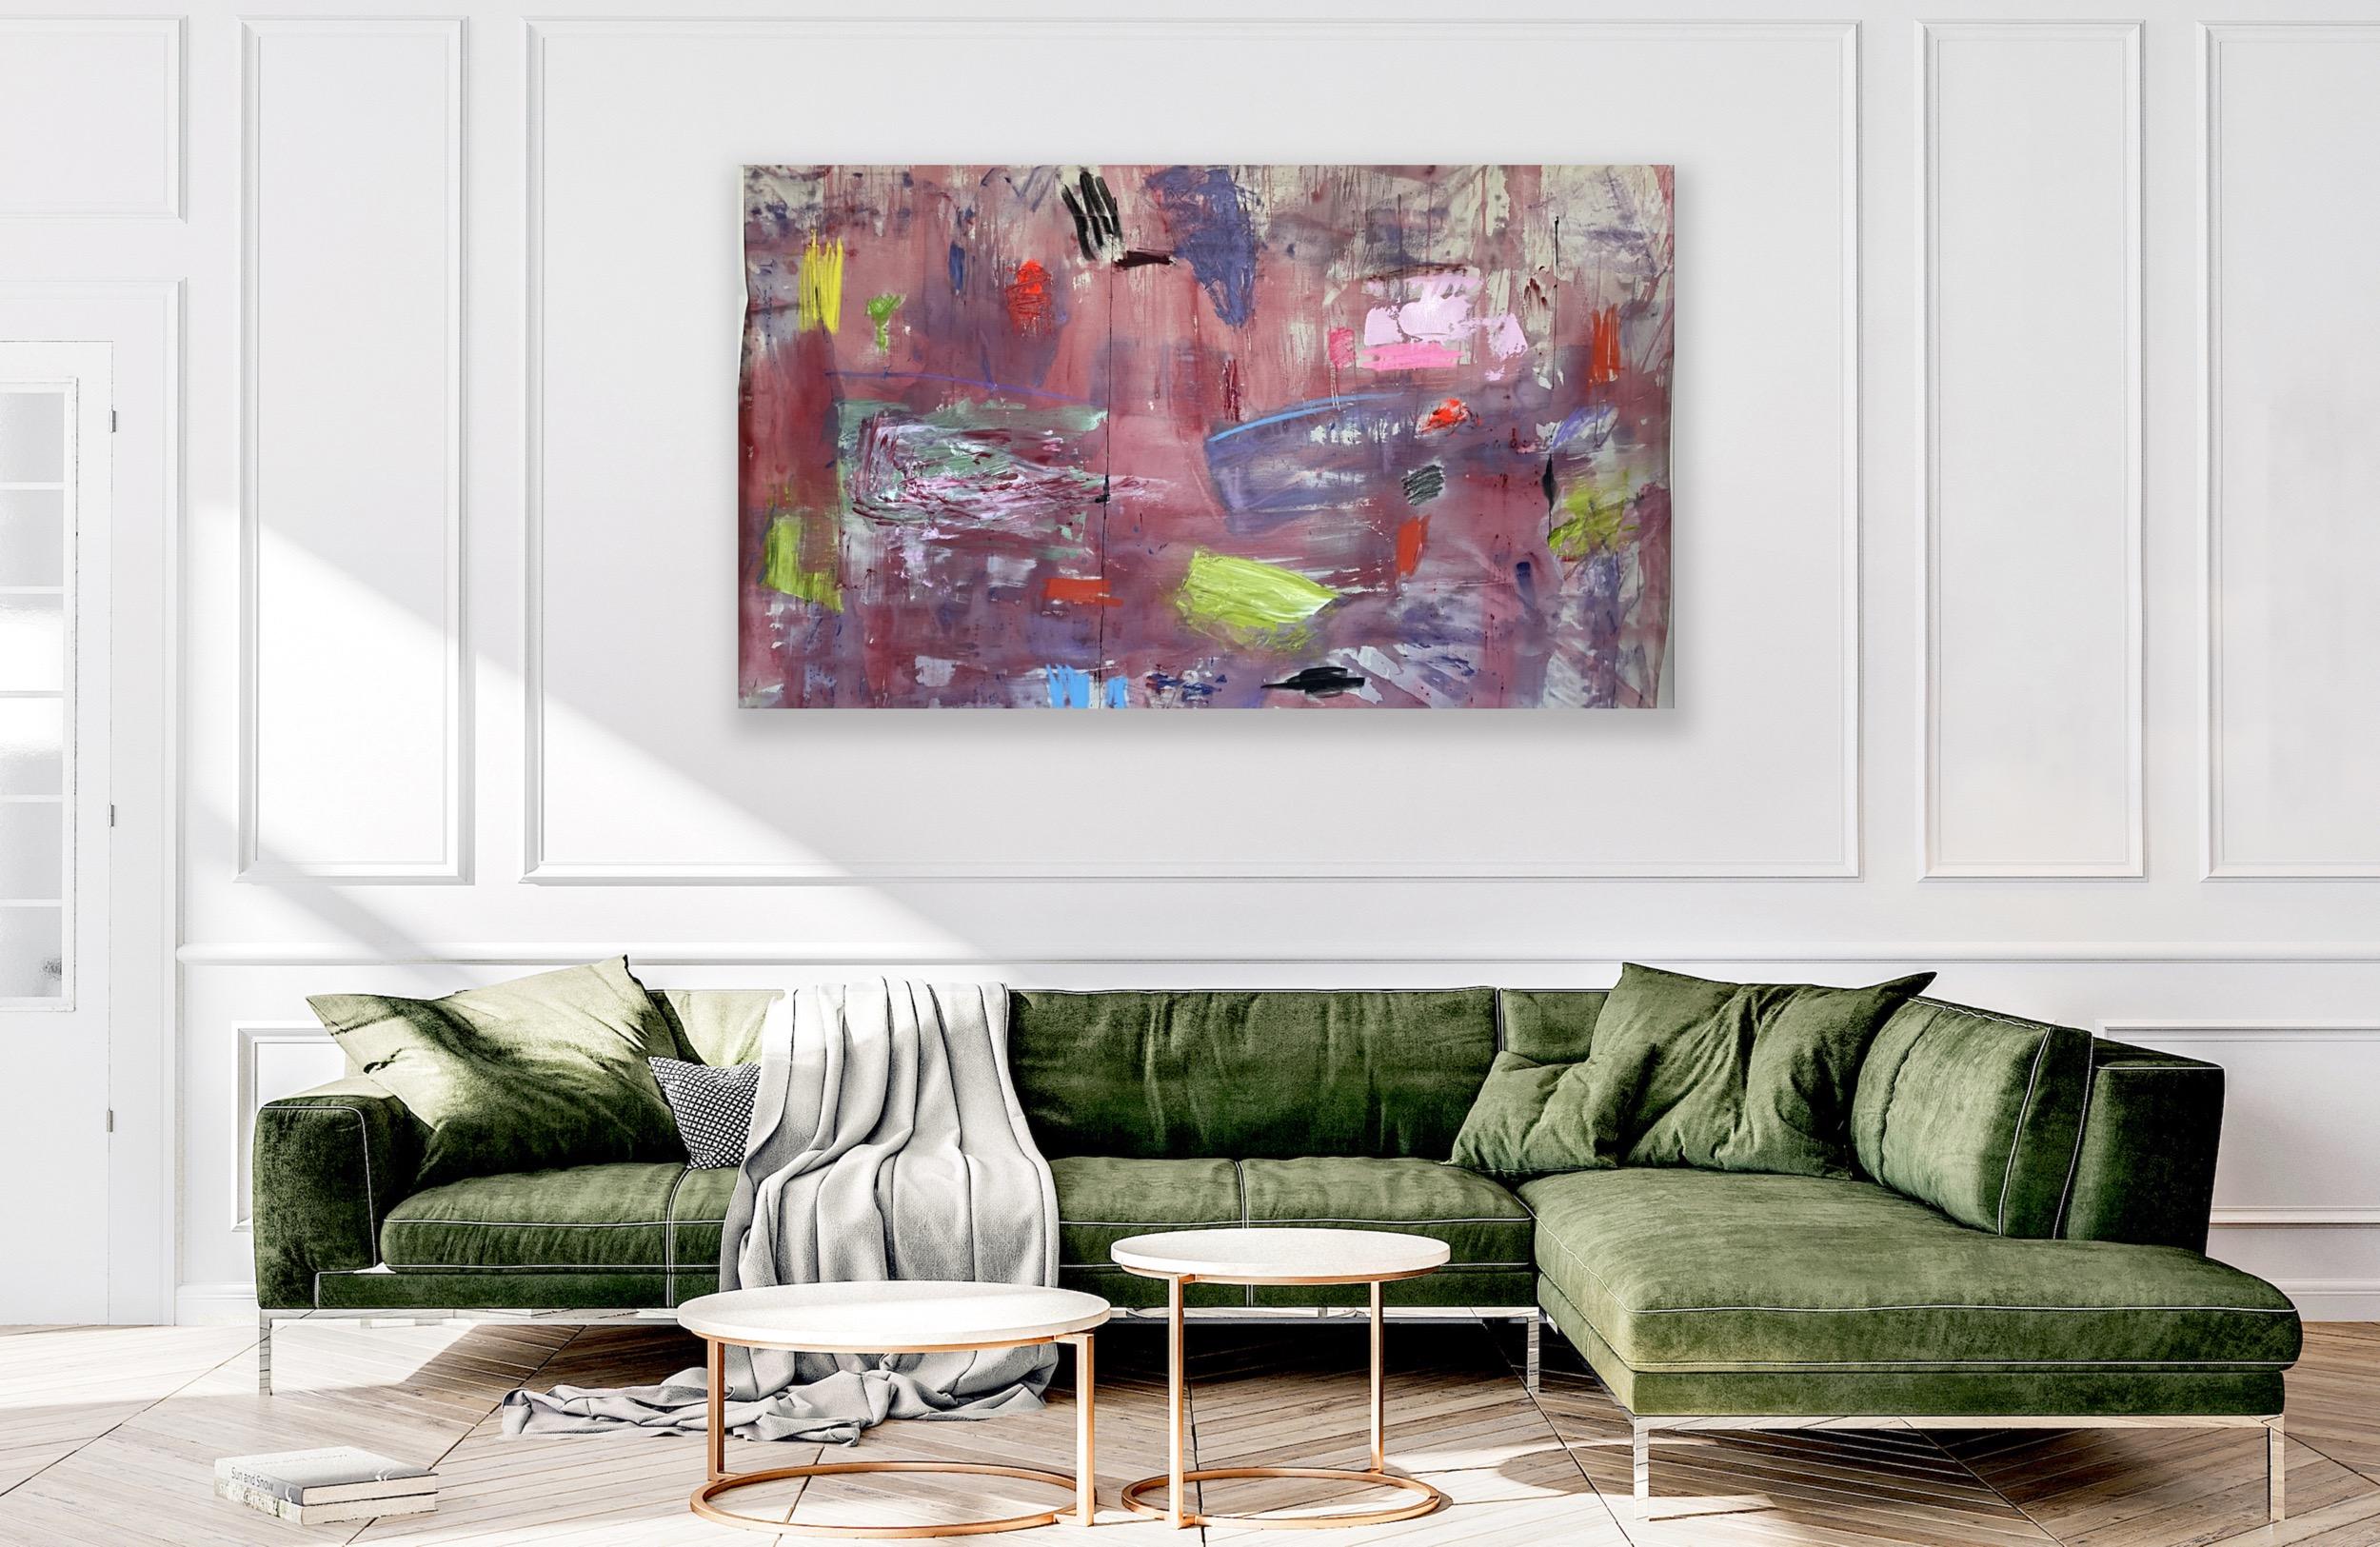 Cosmic Neighborhood - Abstract Expressionist Painting by Francine Tint